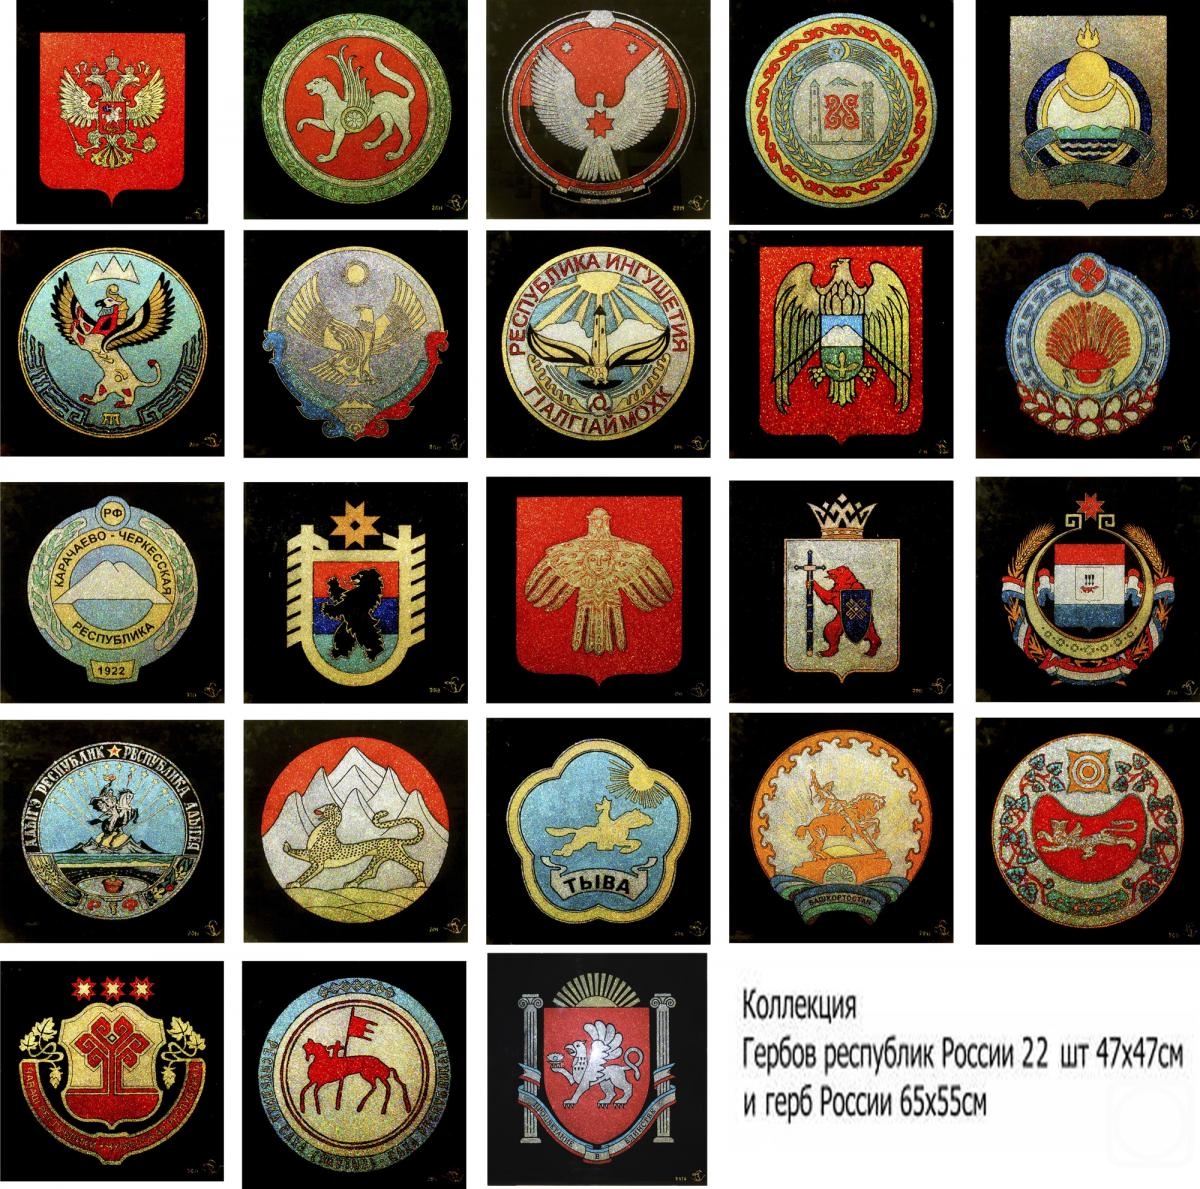 Stolyarov Vadim. Collection Emblem of the Republic Russia